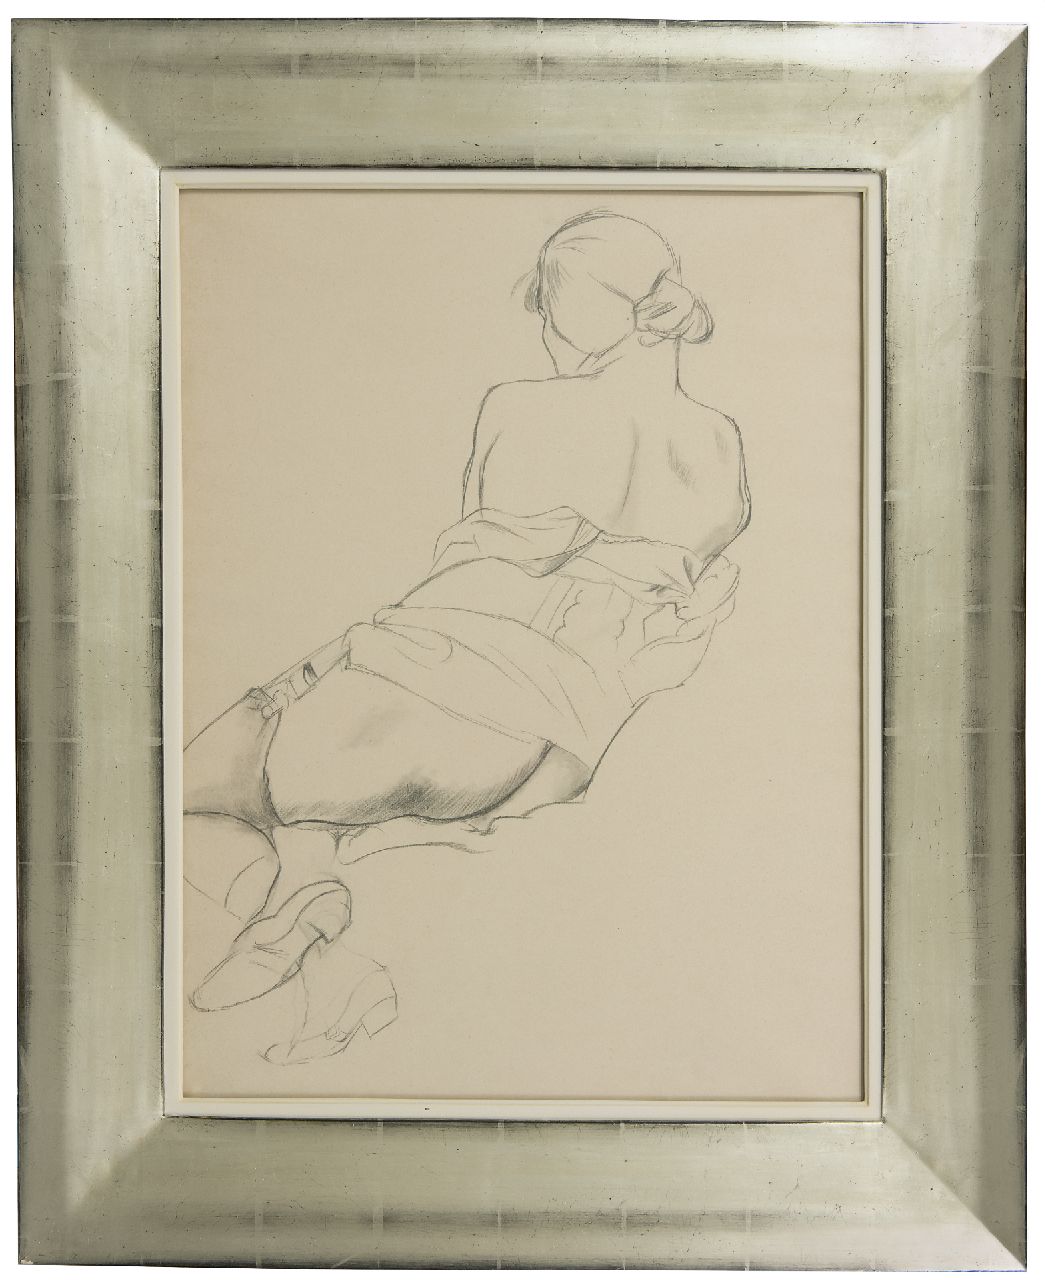 Grosz G.  | George 'Georg' Grosz | Watercolours and drawings offered for sale | Nude, seen from the back, pencil on paper 58.0 x 43.0 cm, r.o. dated with stamp 19 NOV 23